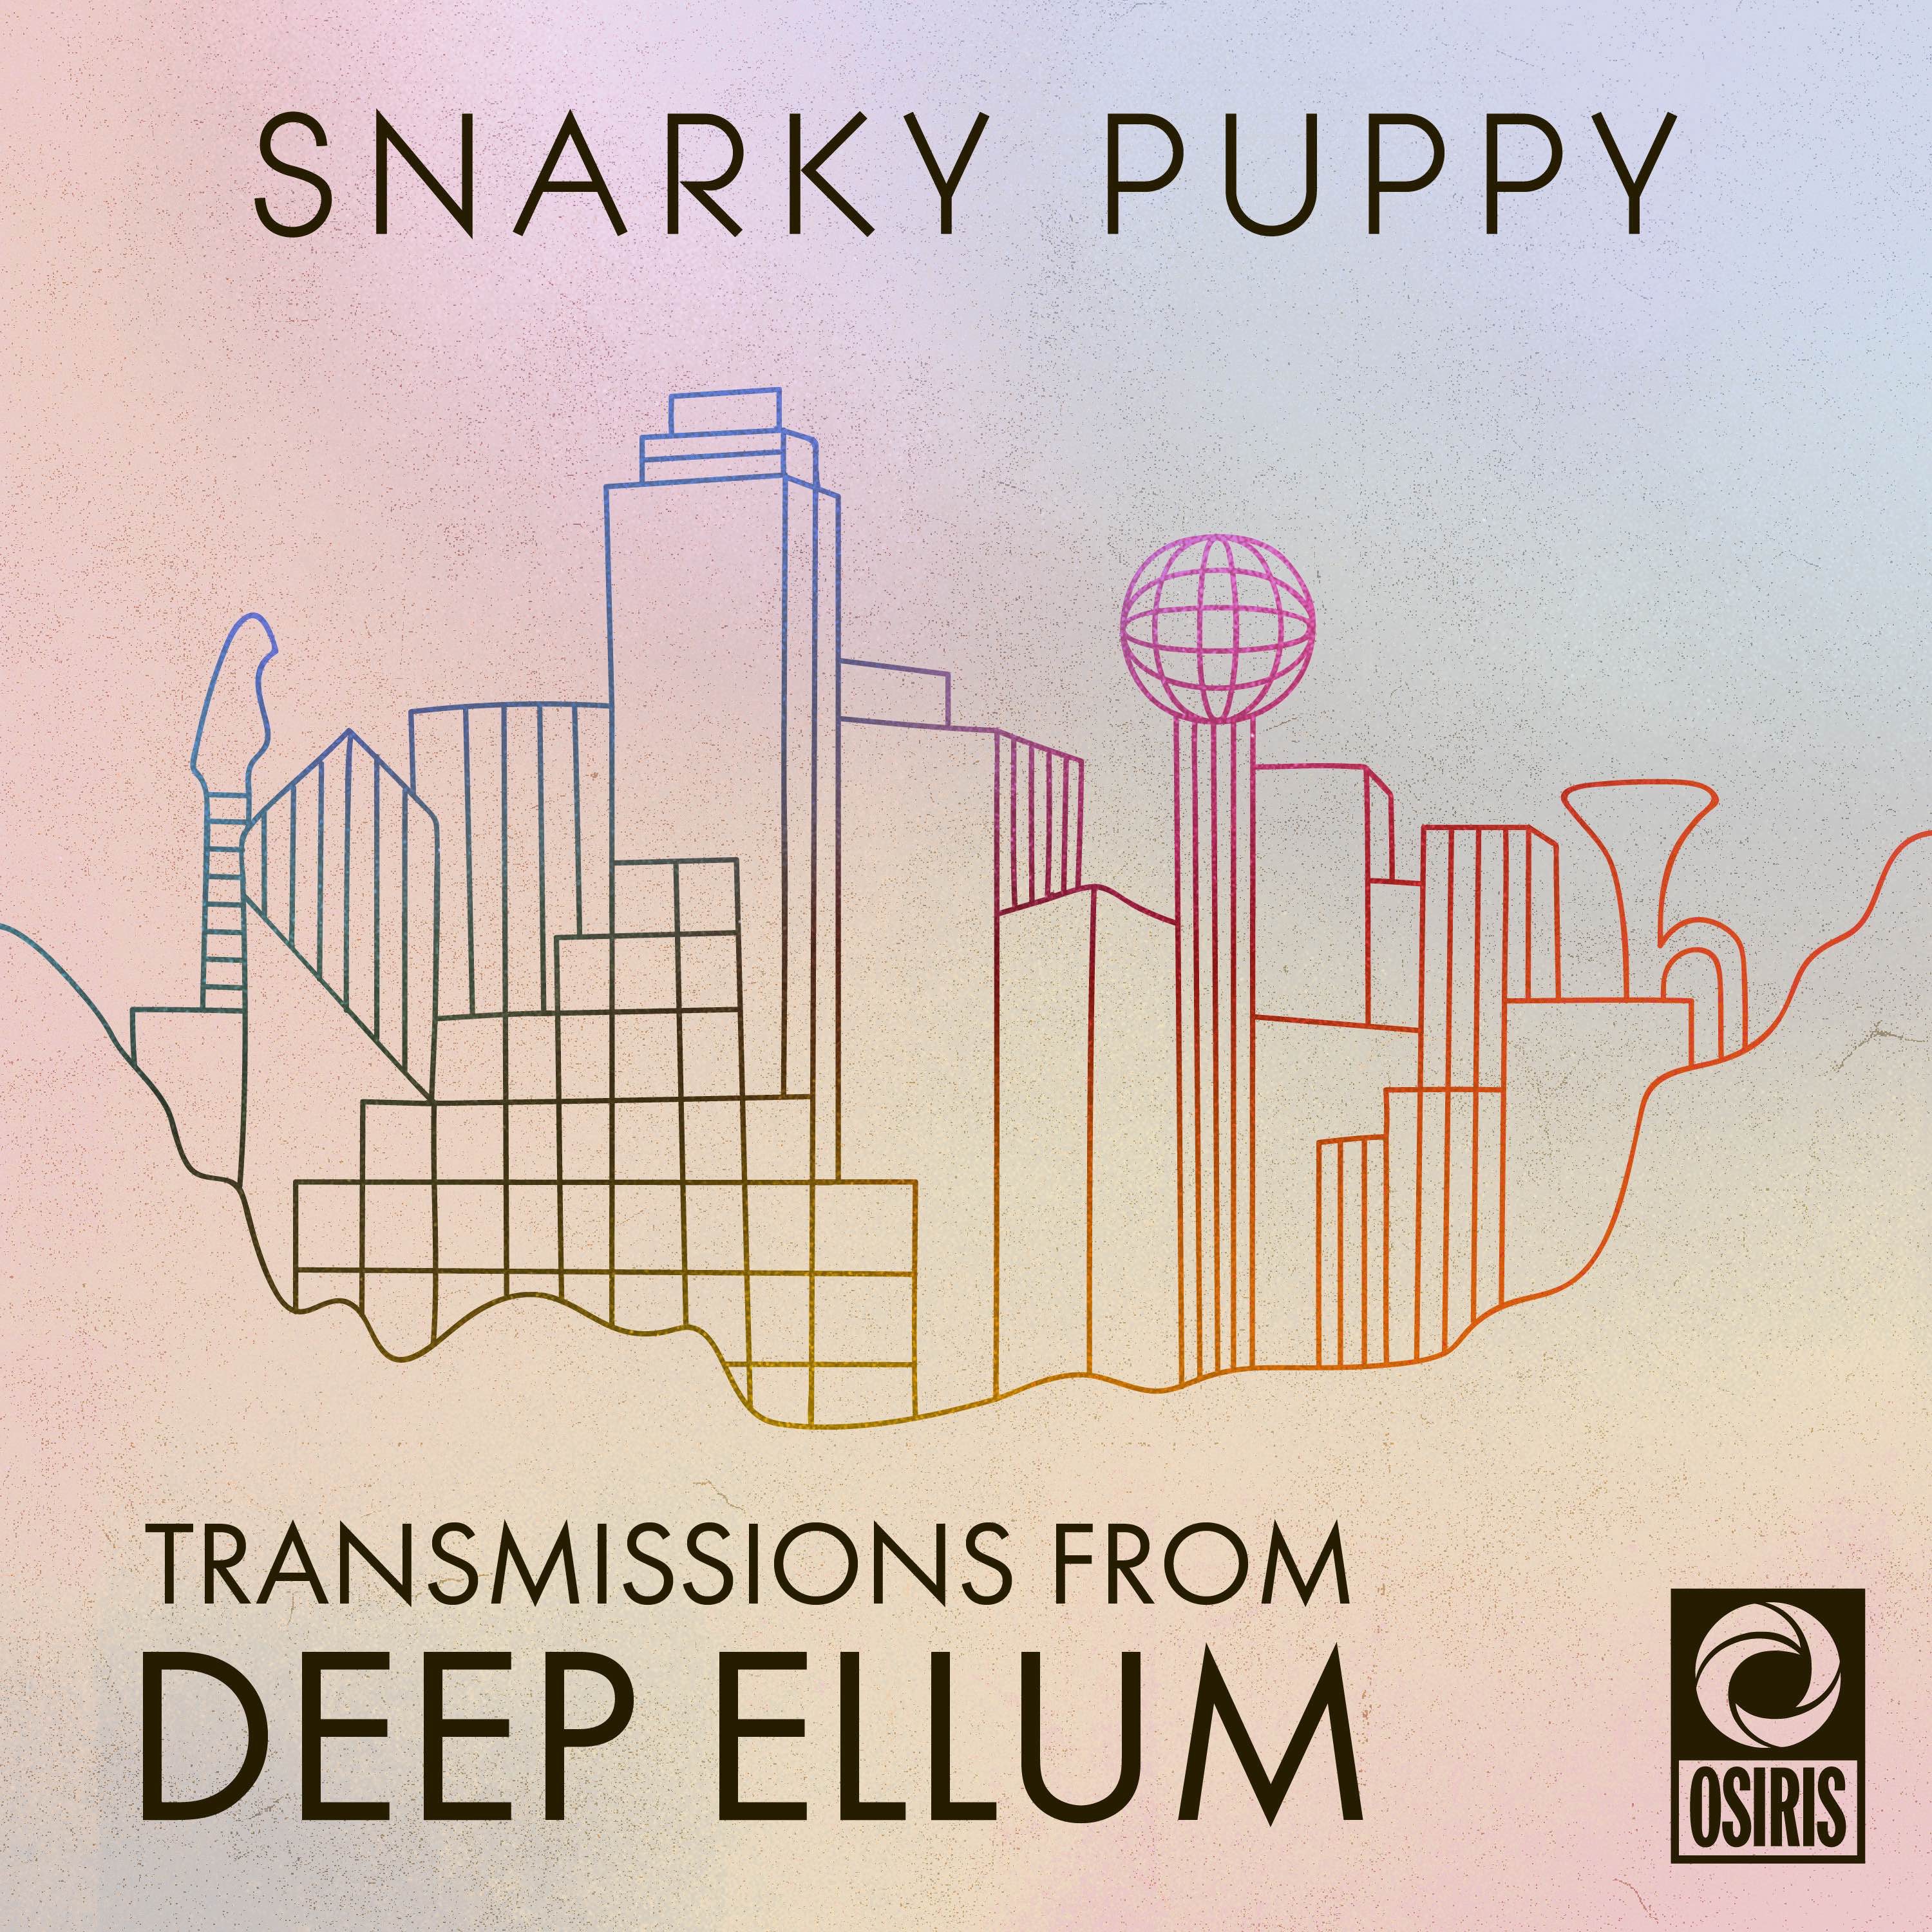 Snarky Puppy: Transmissions From Deep Ellum podcast show image